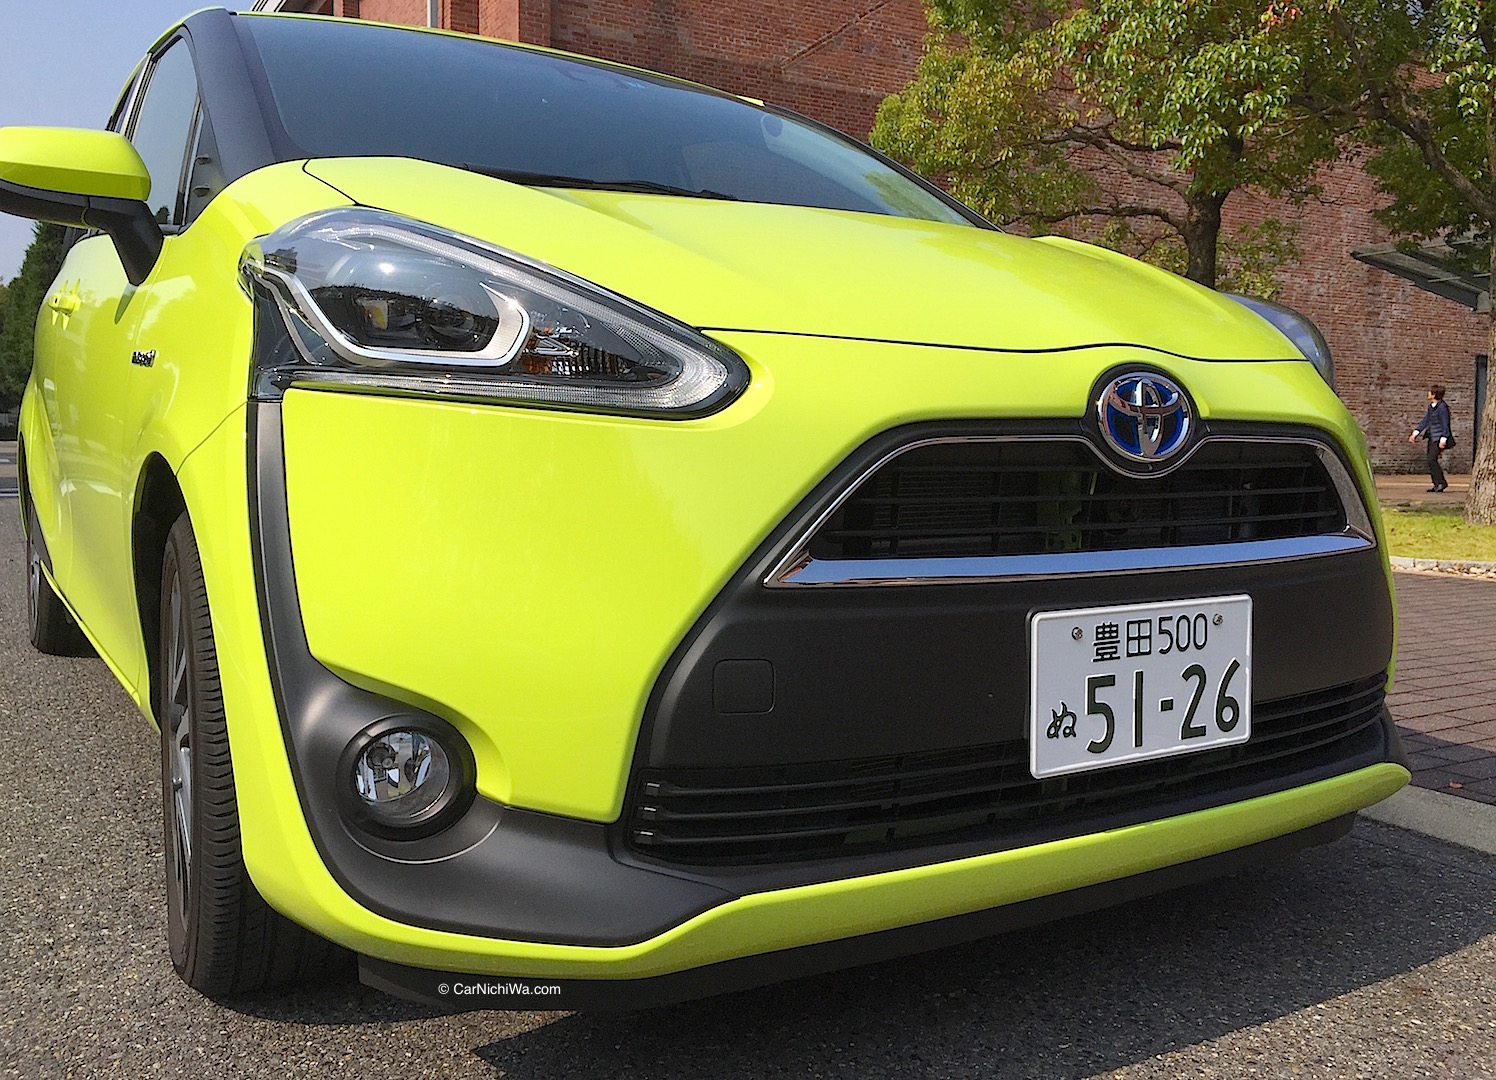 Toyota Sienta Quick Review in Japan – We Test this New-Age Van in